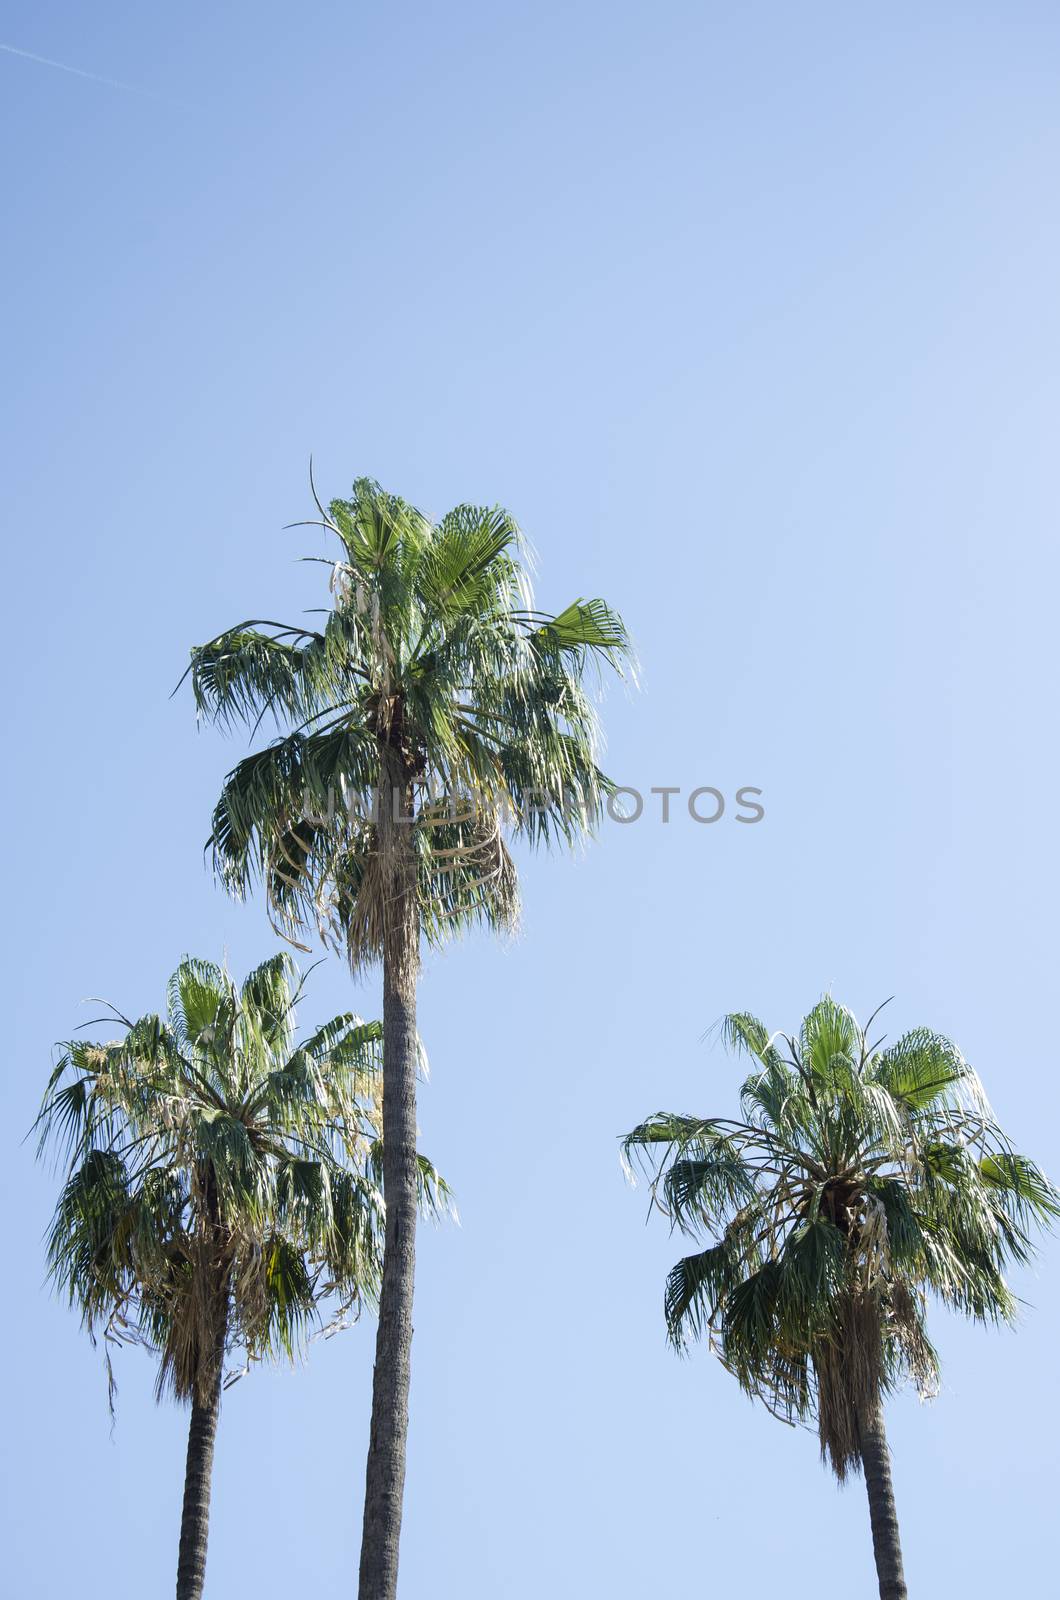 Palm trees against a blue sky and building with thin clouds in Barcelona, Spain. Beautiful blue sunny day. Tree palm trees in hot summer day against sky and house